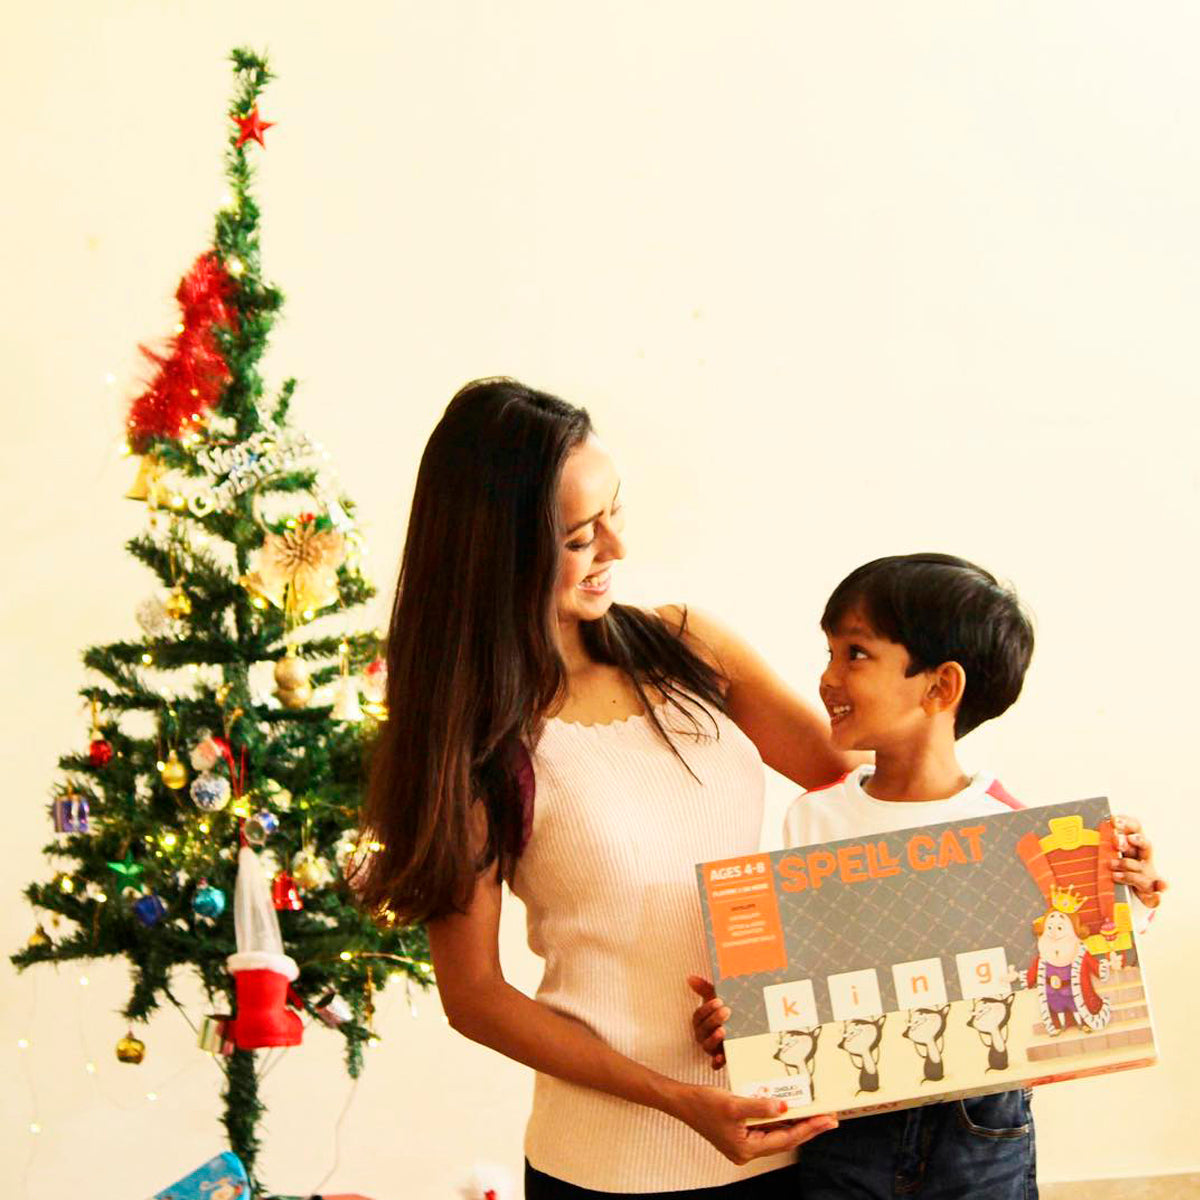 Awesome Christmas, Birthday, Rakhi presents and Return Gift Options for kid sbirthday parties by Chalk and Chuckles